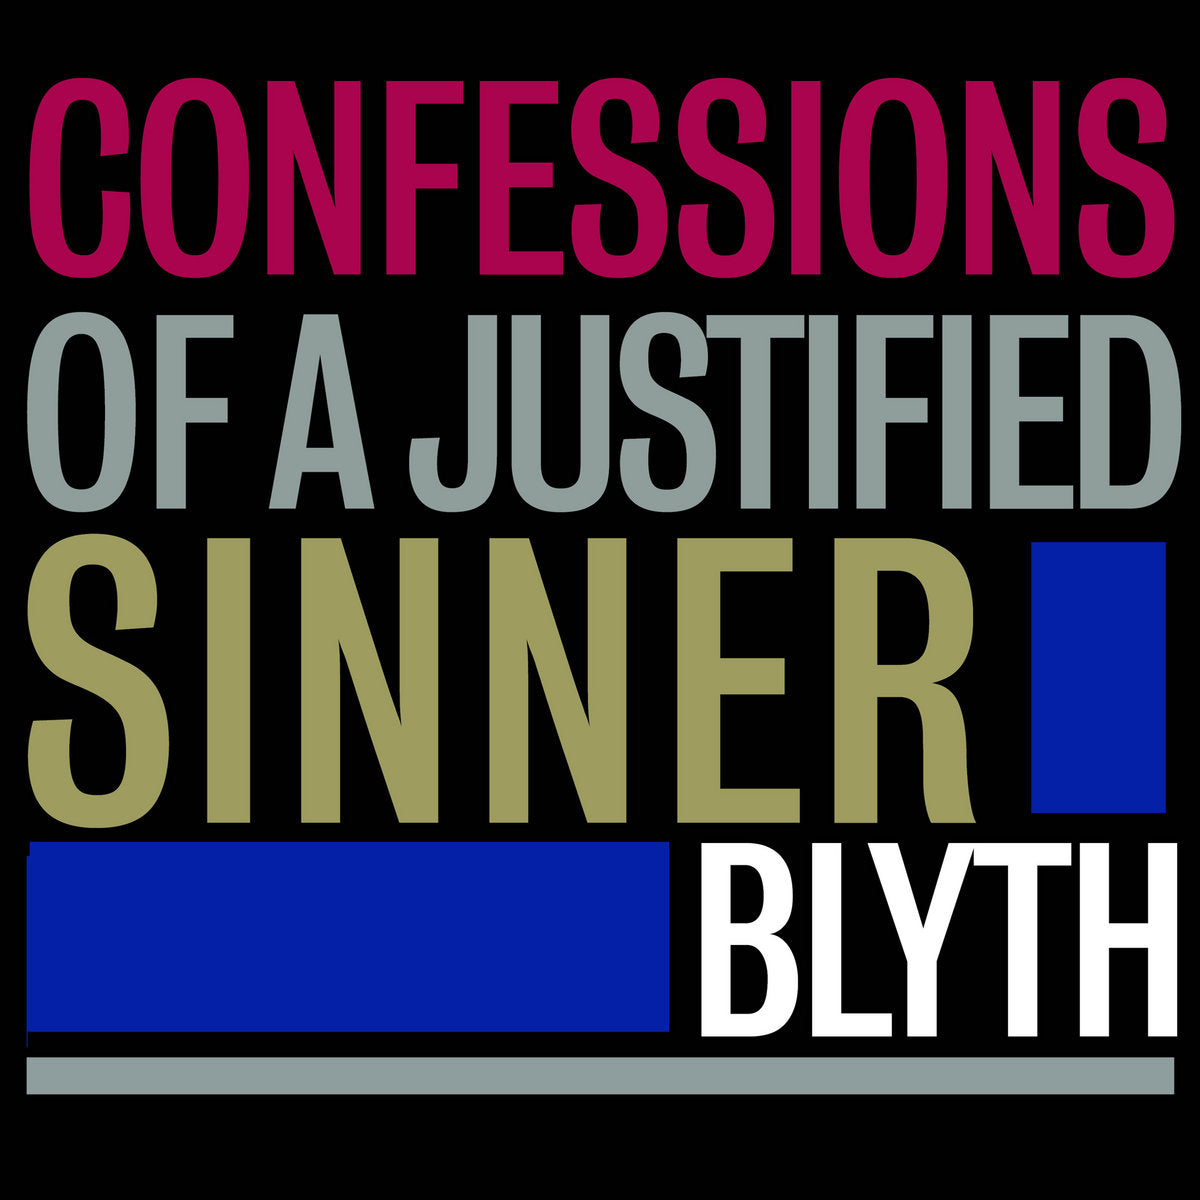 BLYTH - Confessions Of A Justified Sinner - LP - 180g Vinyl